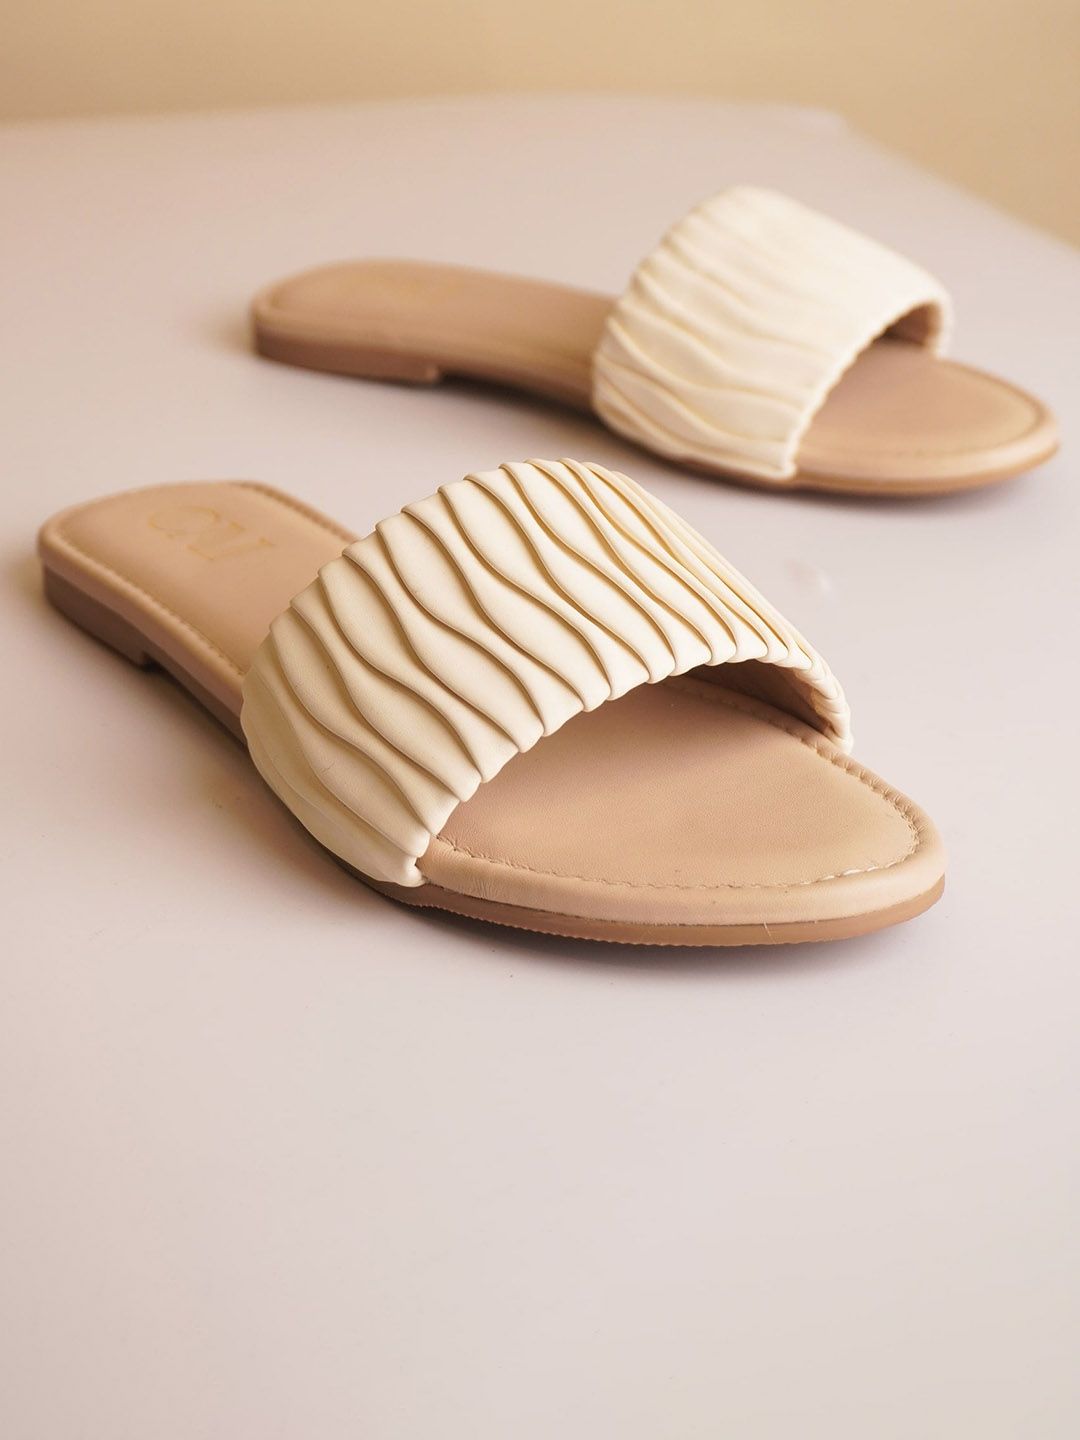 CAI Textured Wave Open Toe Flats Price in India